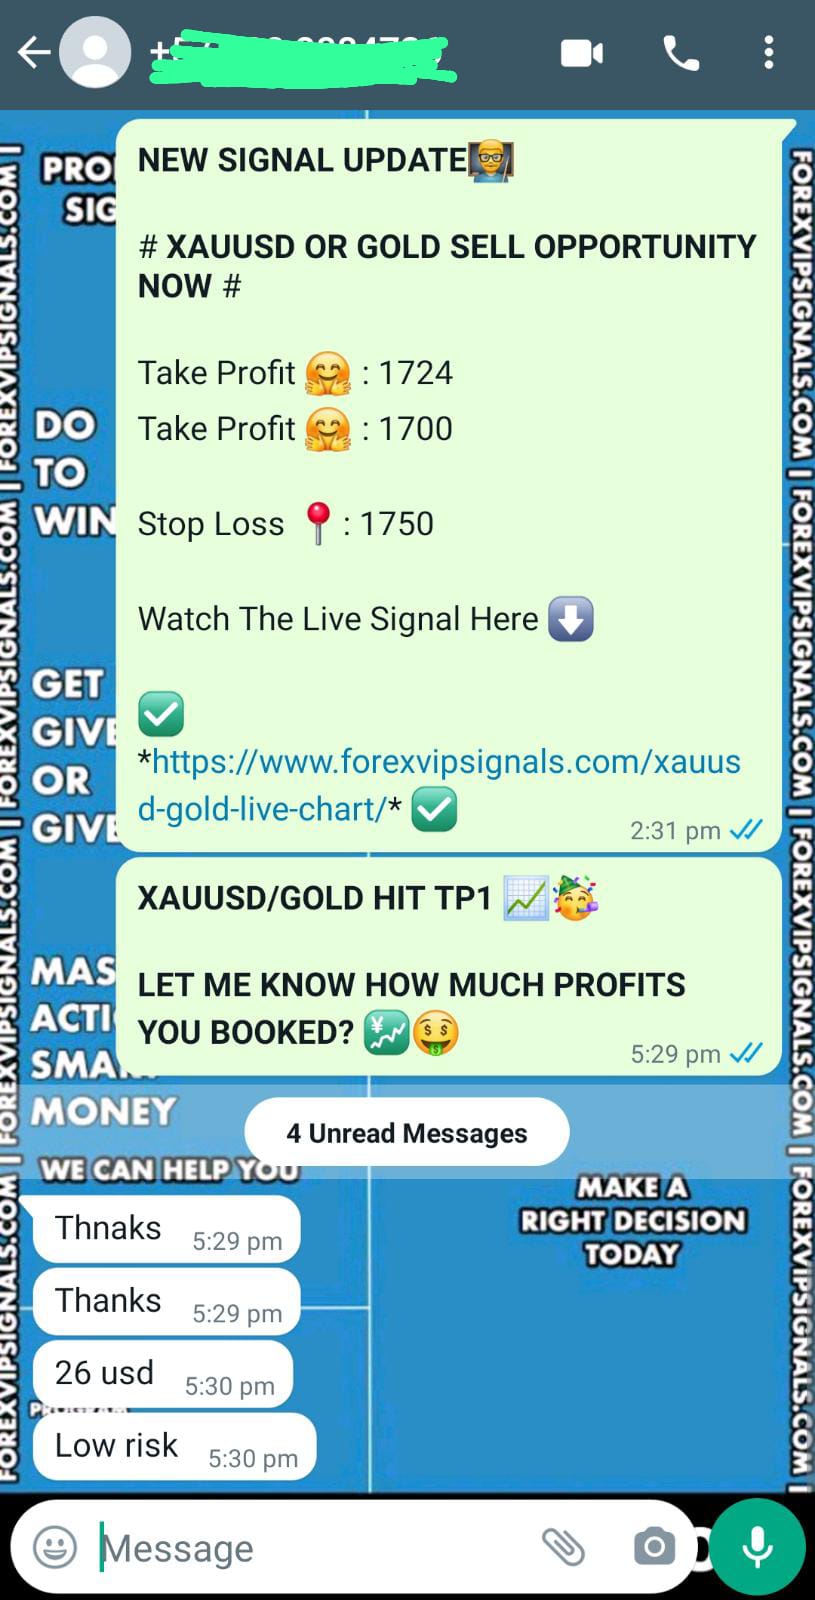 mt4 with forex vip signals